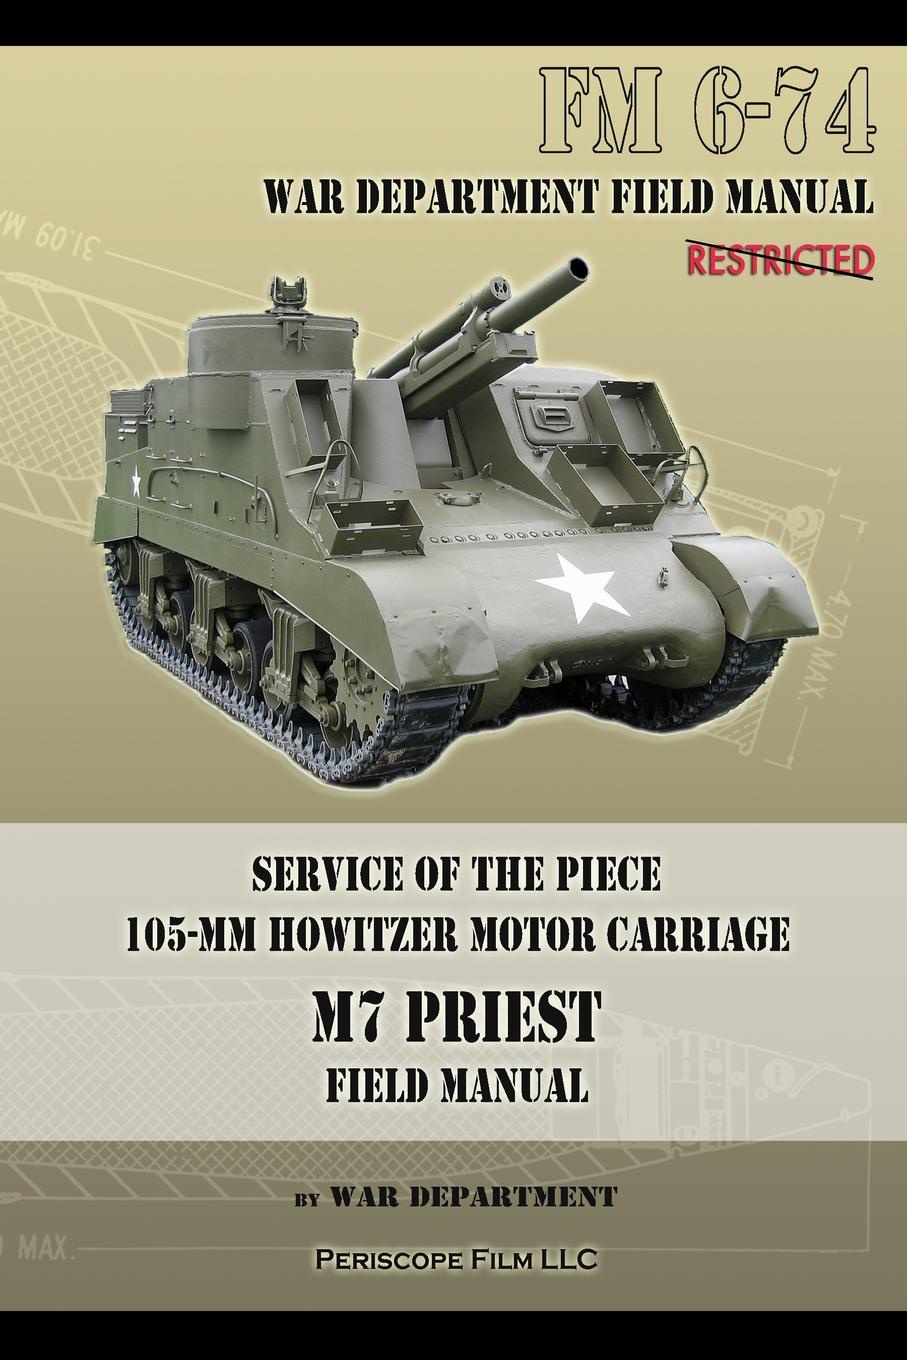 Service of the Piece 105-MM Howitzer Motor Carriage M7 Priest Field Manual. FM 6-74